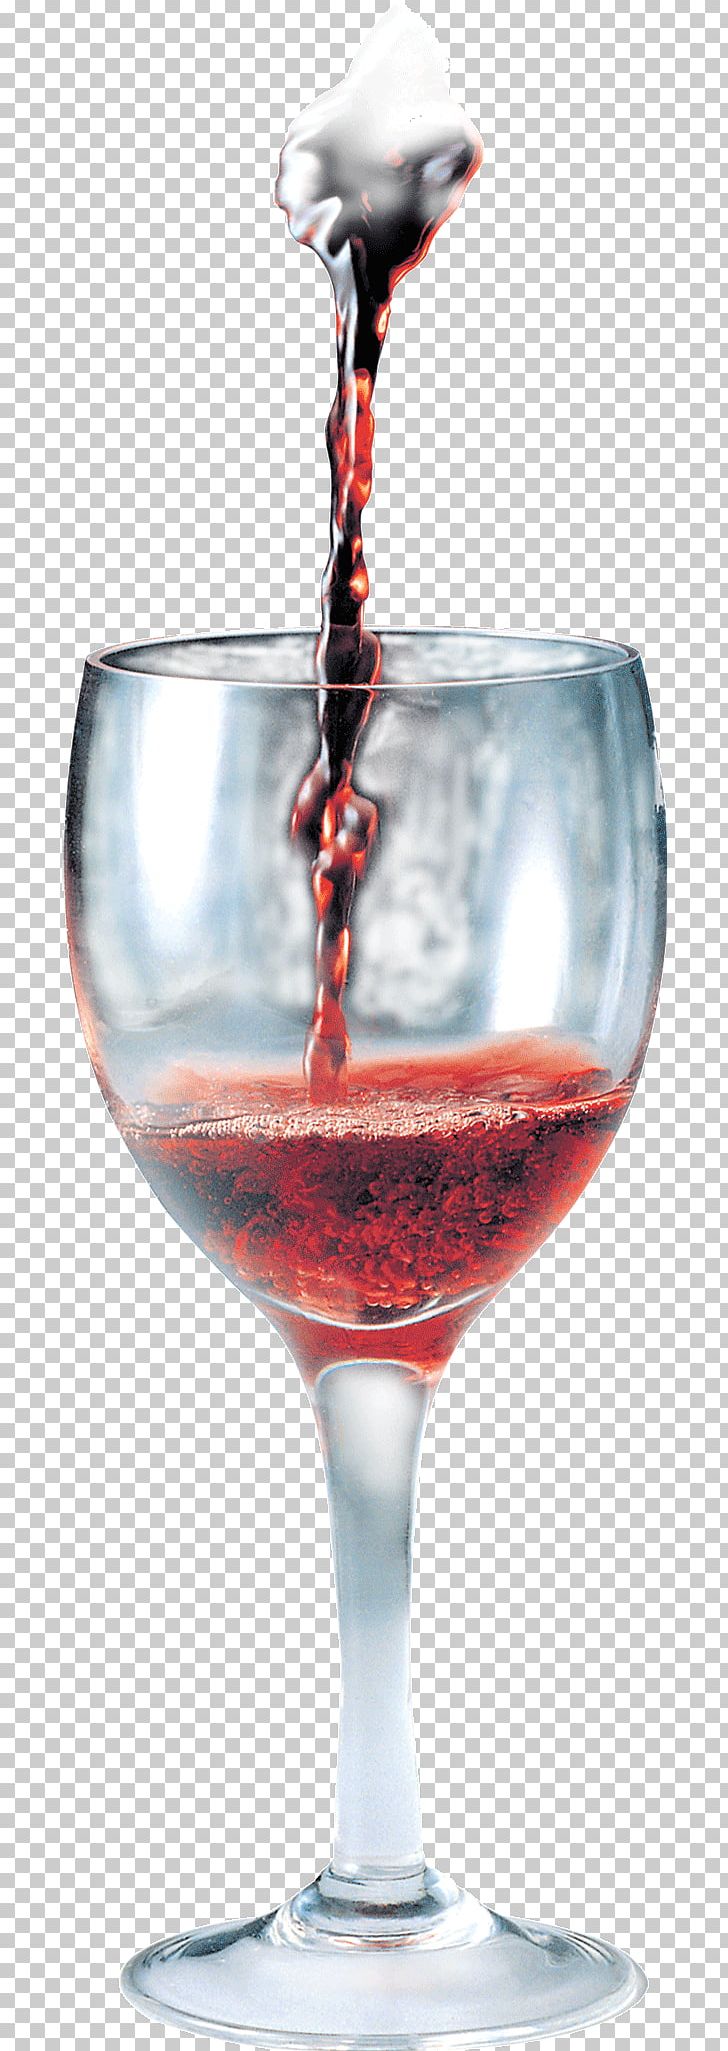 Red Wine Juice Wine Glass Cocktail PNG, Clipart, Broken Wineglass, Champagne, Champagne Glass, Champagne Stemware, Cocktail Garnish Free PNG Download